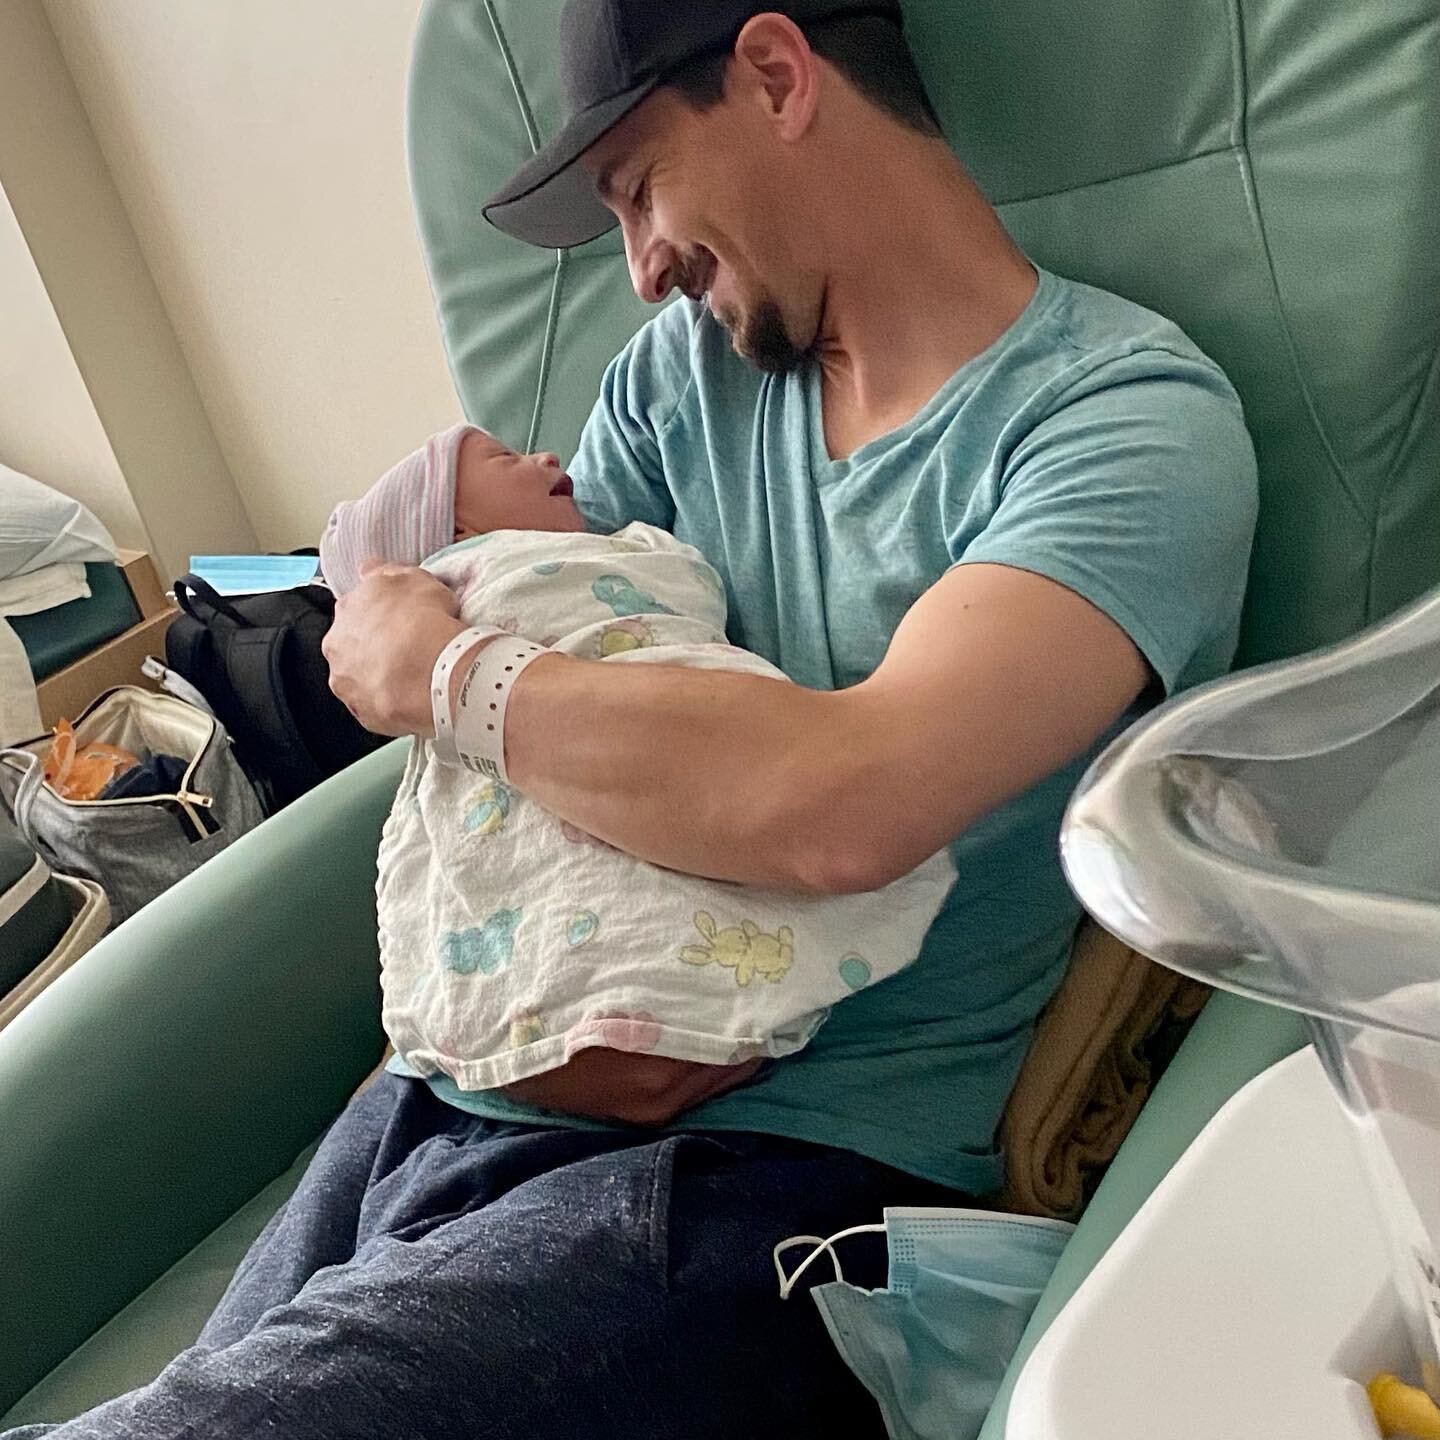 Taking some time off the water to help train up our new crew member!! I can&rsquo;t wait to take you fishing little buddy. 

Asher joined our family on Wednesday, March 31st at 1:24 am. We&rsquo;re home from the hospital. Mom and Baby are doing well 